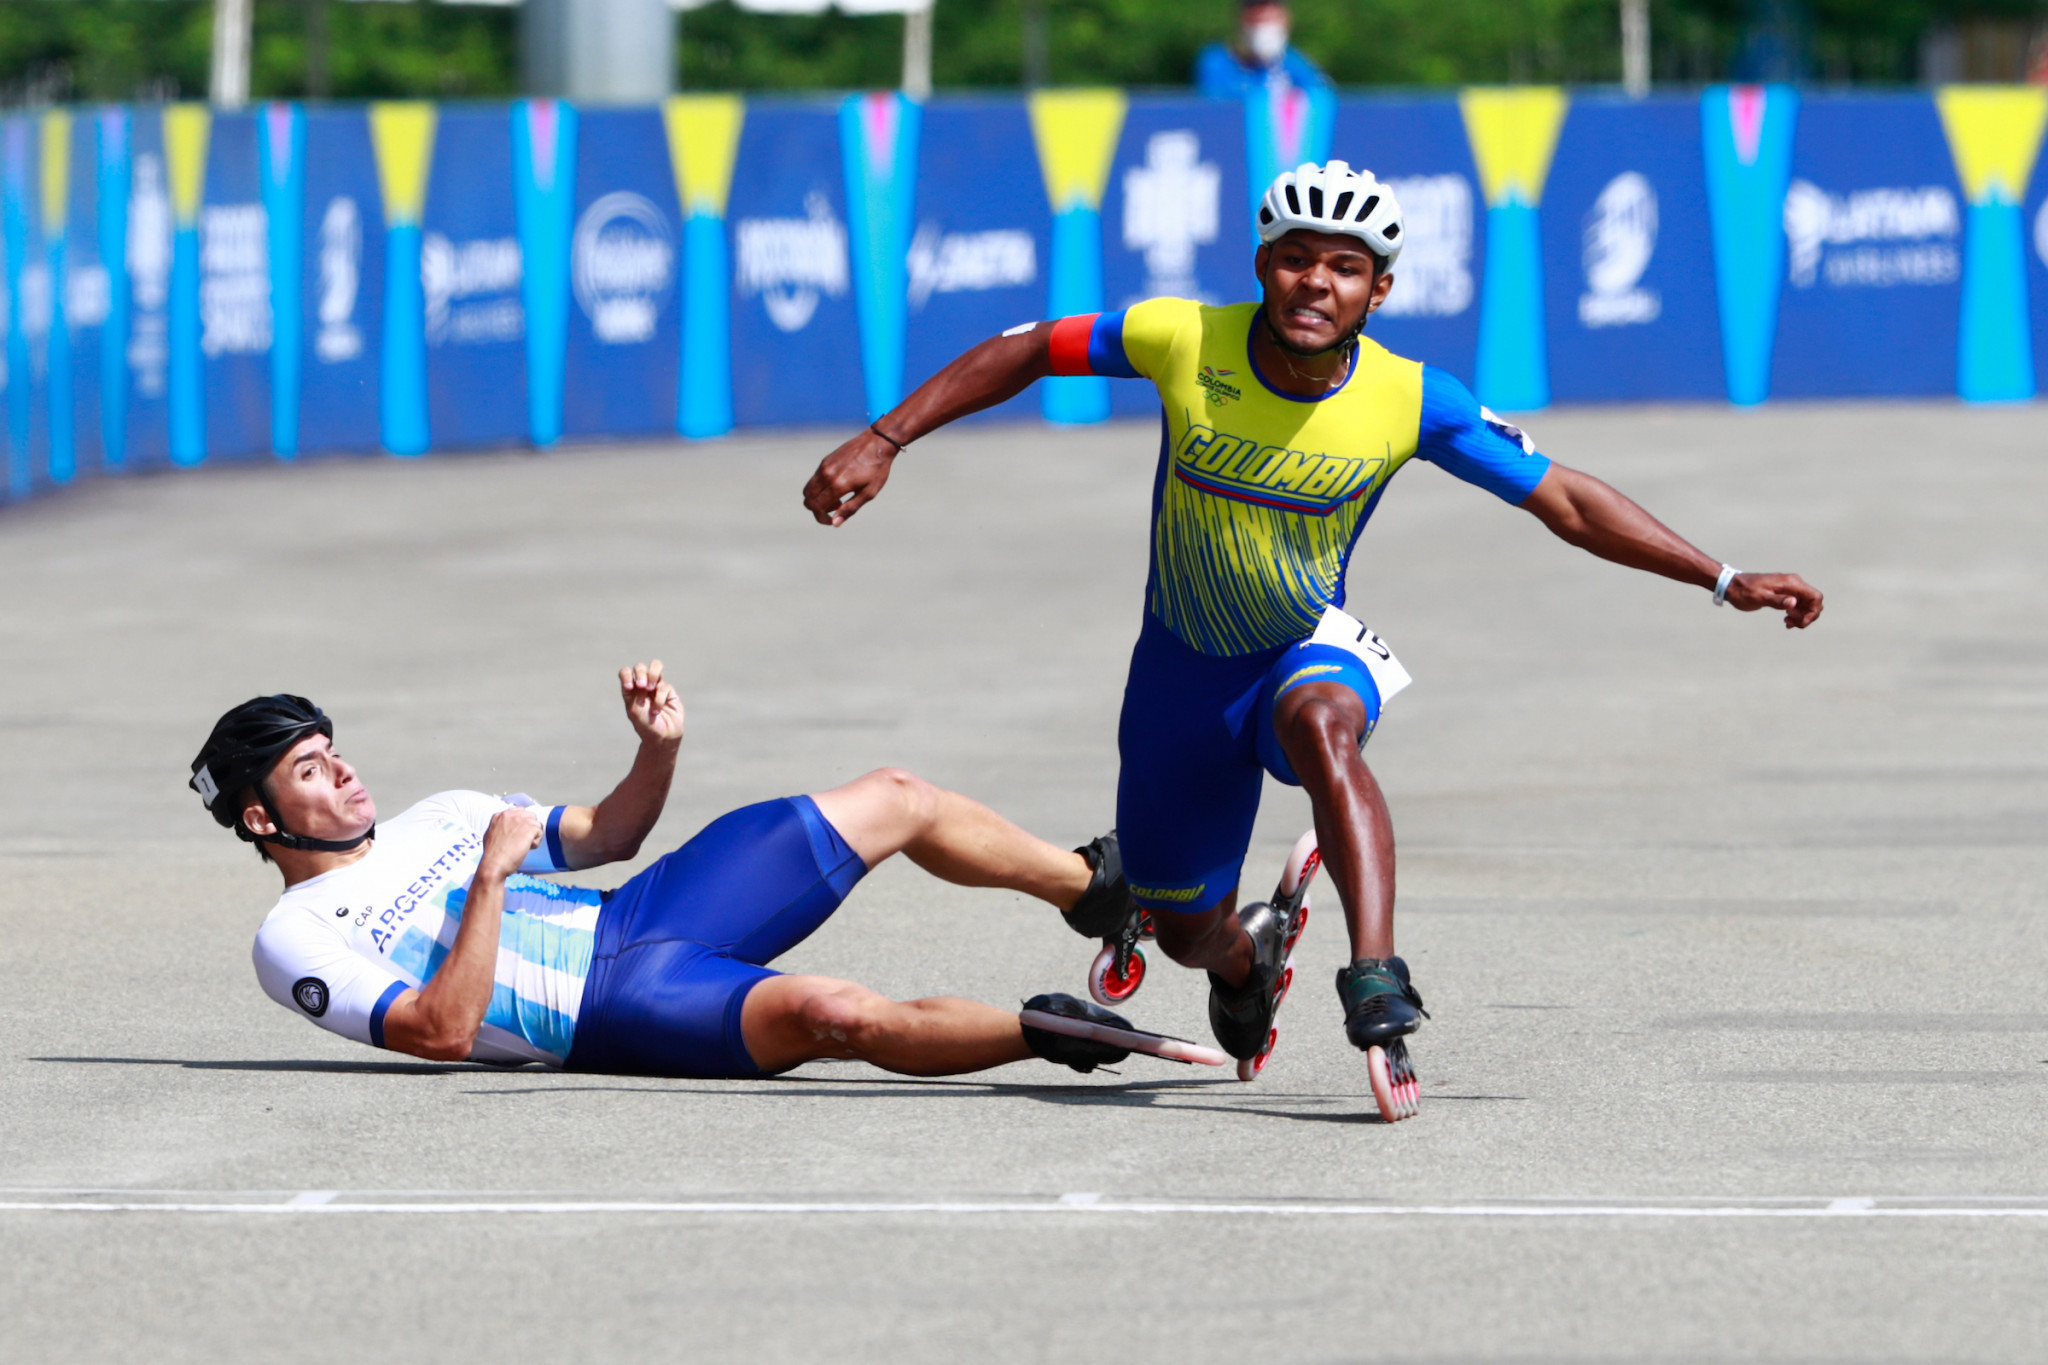 Salomon Carballo won the men's one-lap speed skating race to give Colombia another gold medal at the World Cup Skate Track ©Agencia.Xpress Media